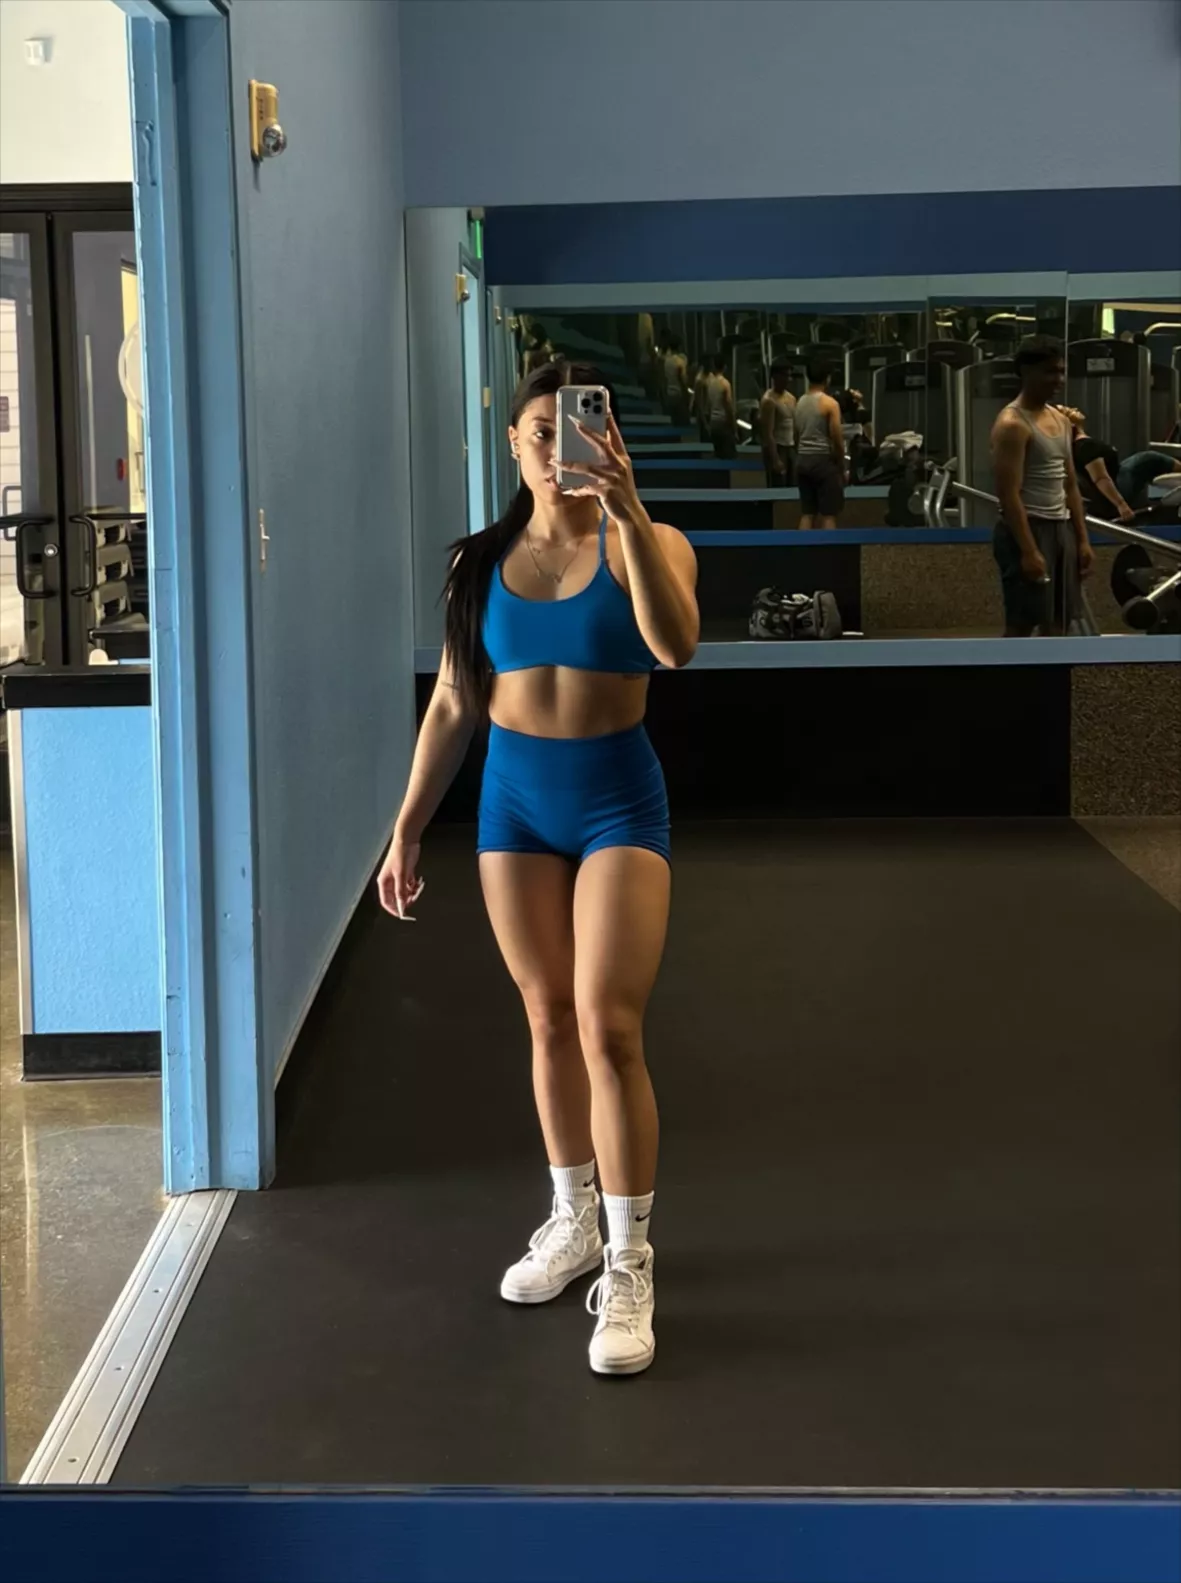 Trying the aurola gym shorts 🧚🏽‍♀️🫶🏼 they're squat proof by